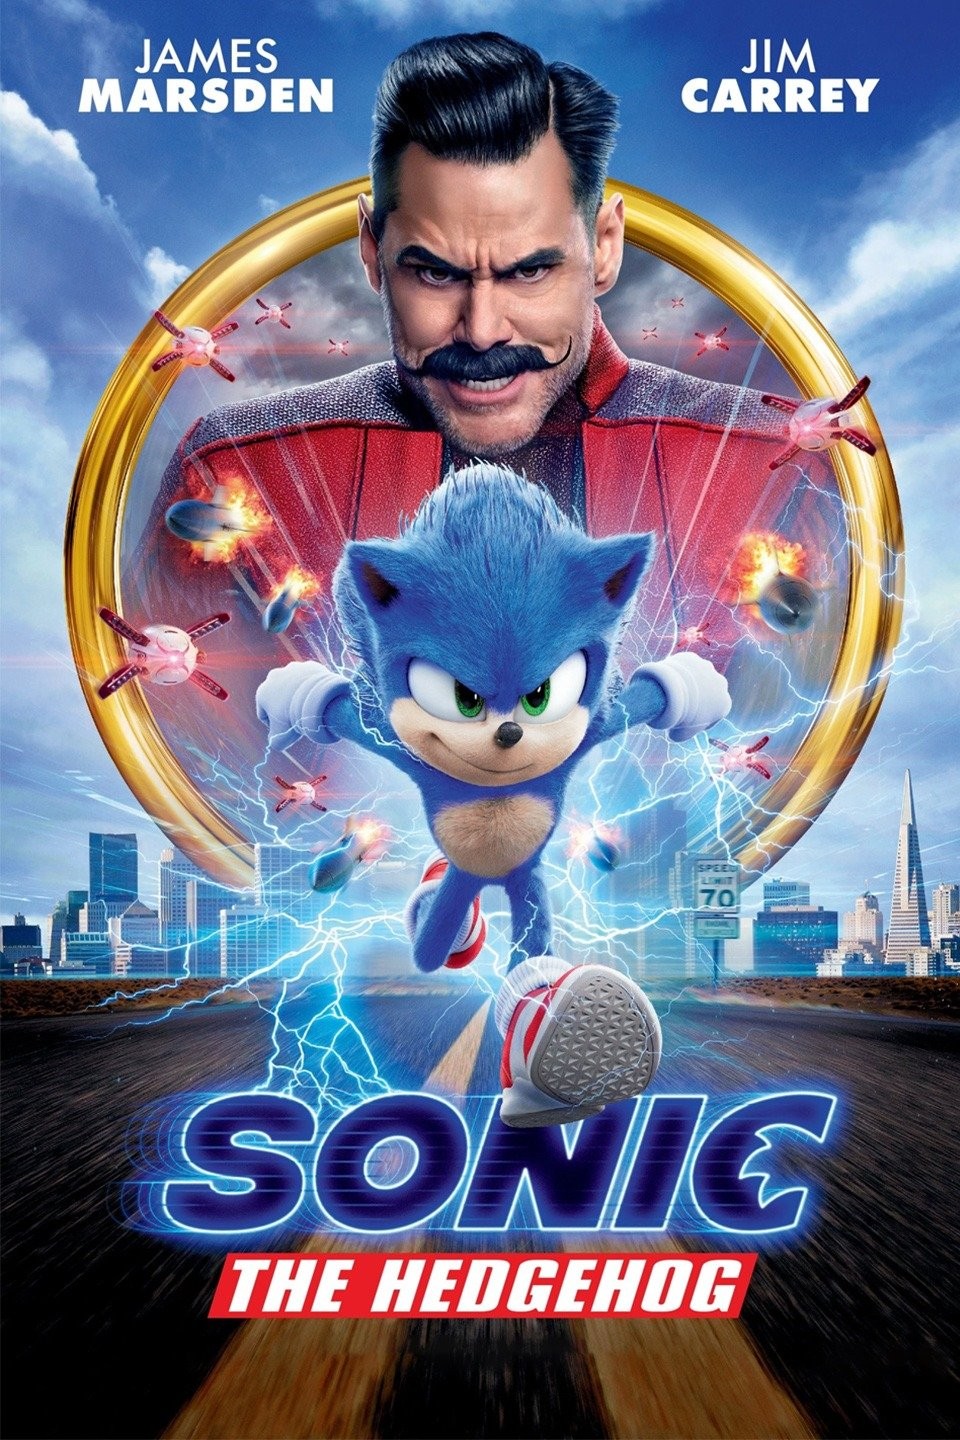 Why do these two look like they're brothers? : r/SonicTheHedgehog